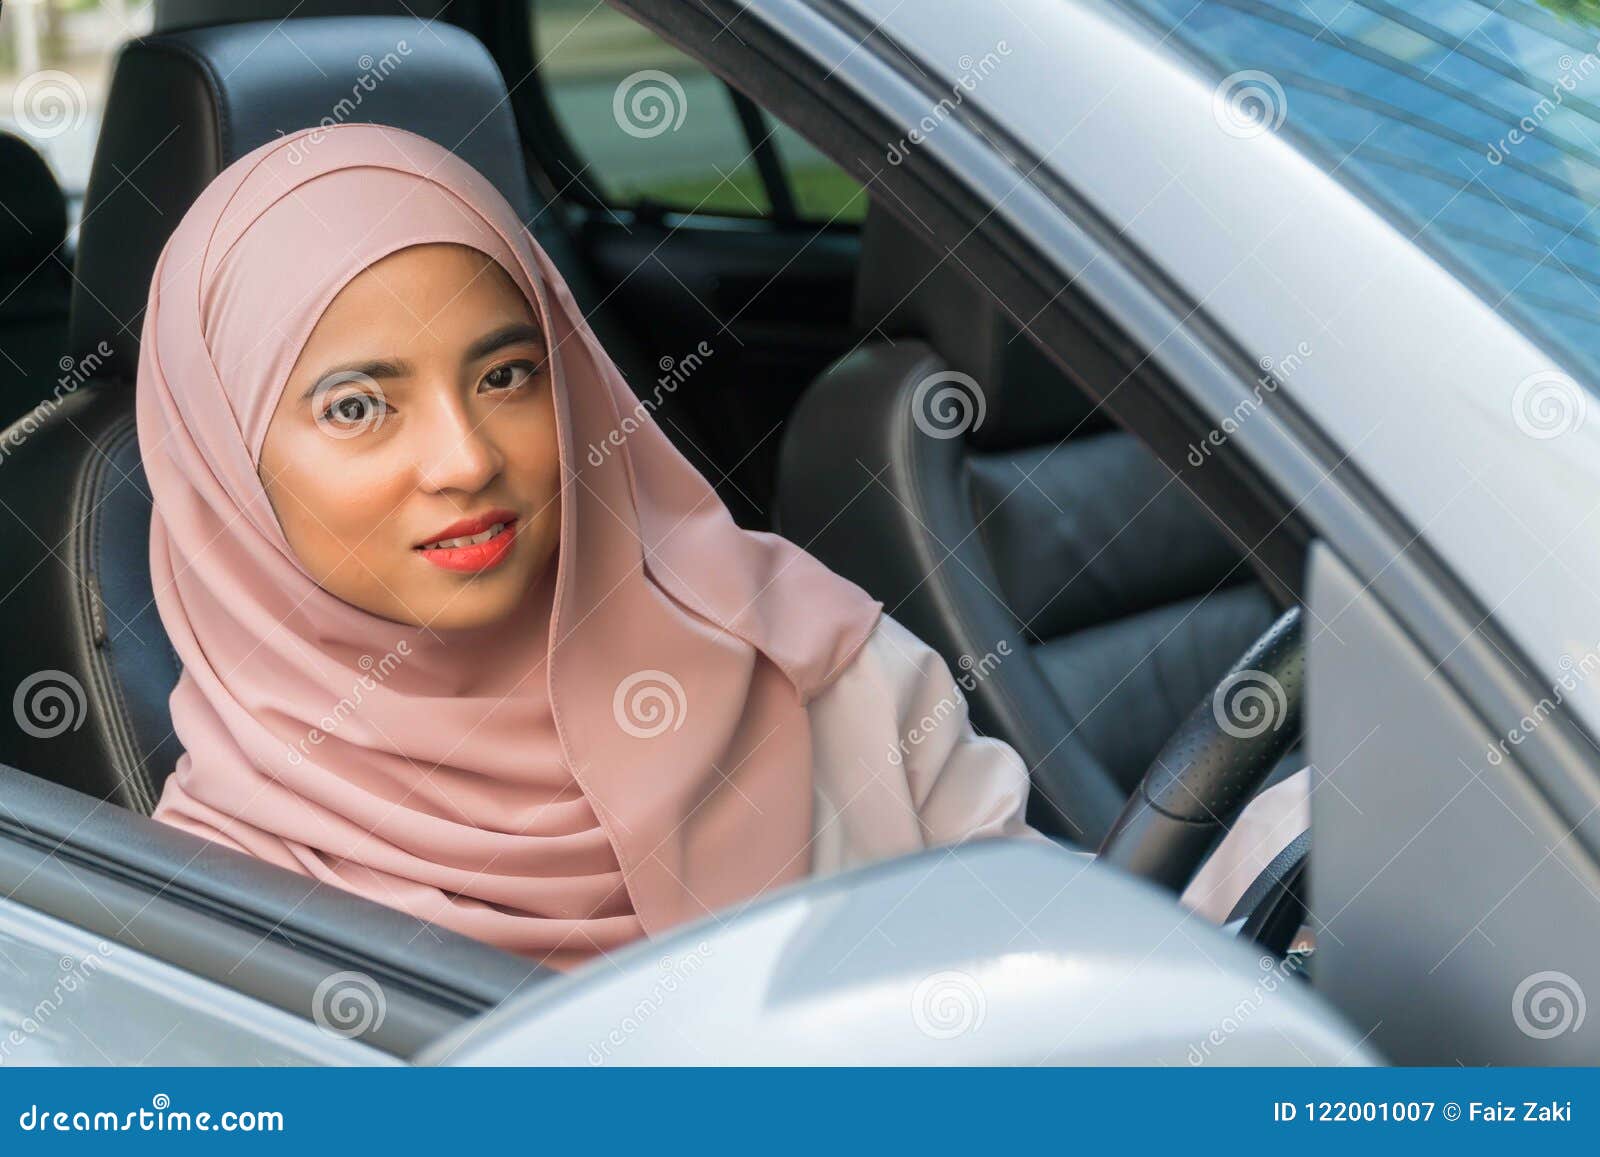 Beautiful Malay Lady in the Car Stock Image  Image of bench, happy